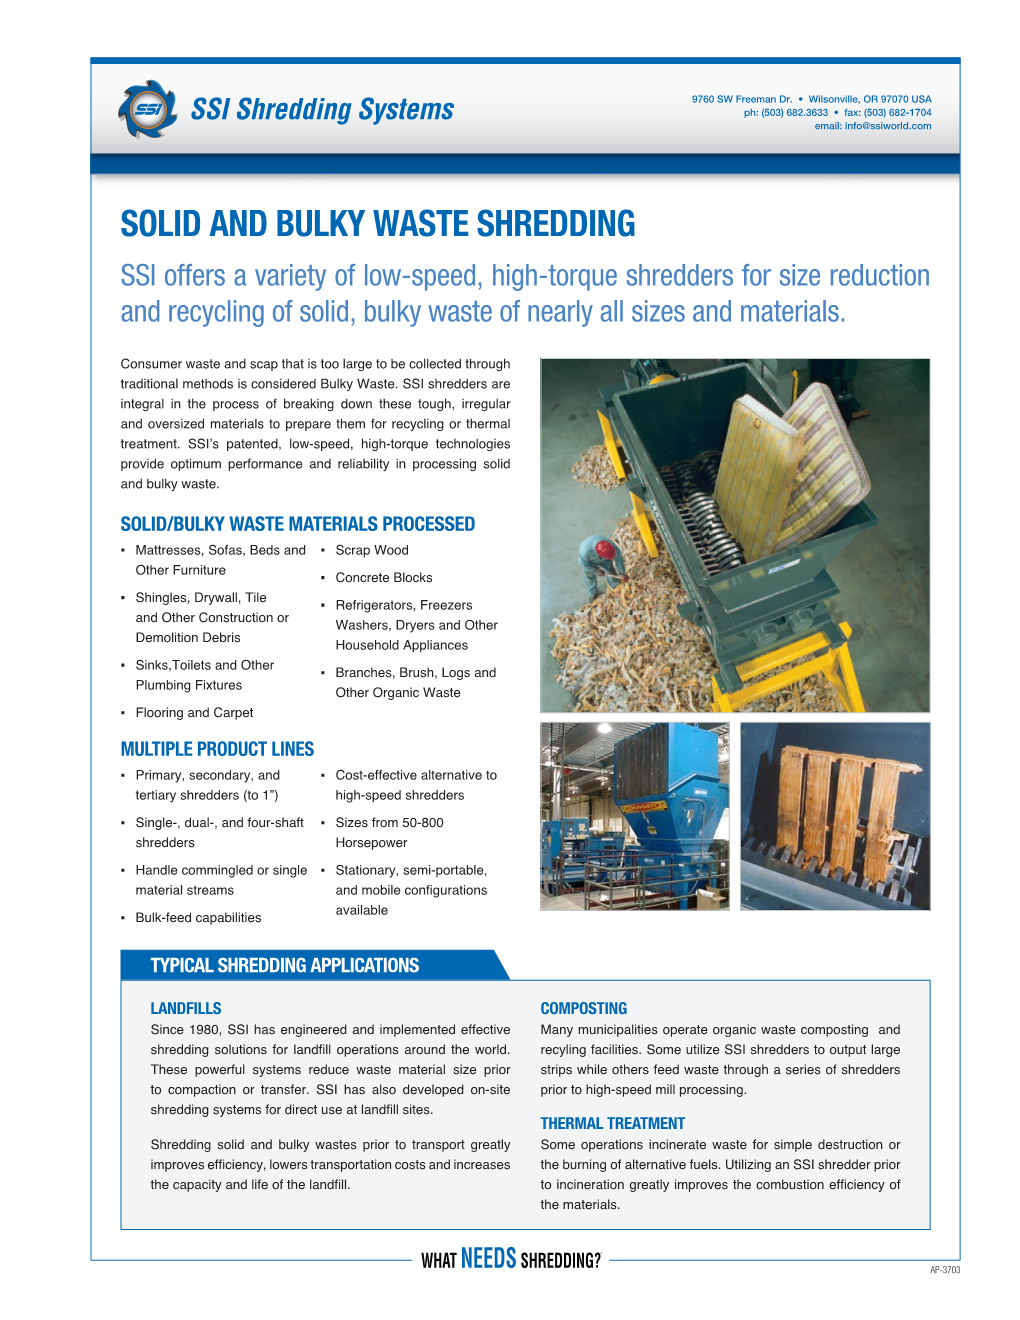 SOLID and Bulky Waste SHREDDING